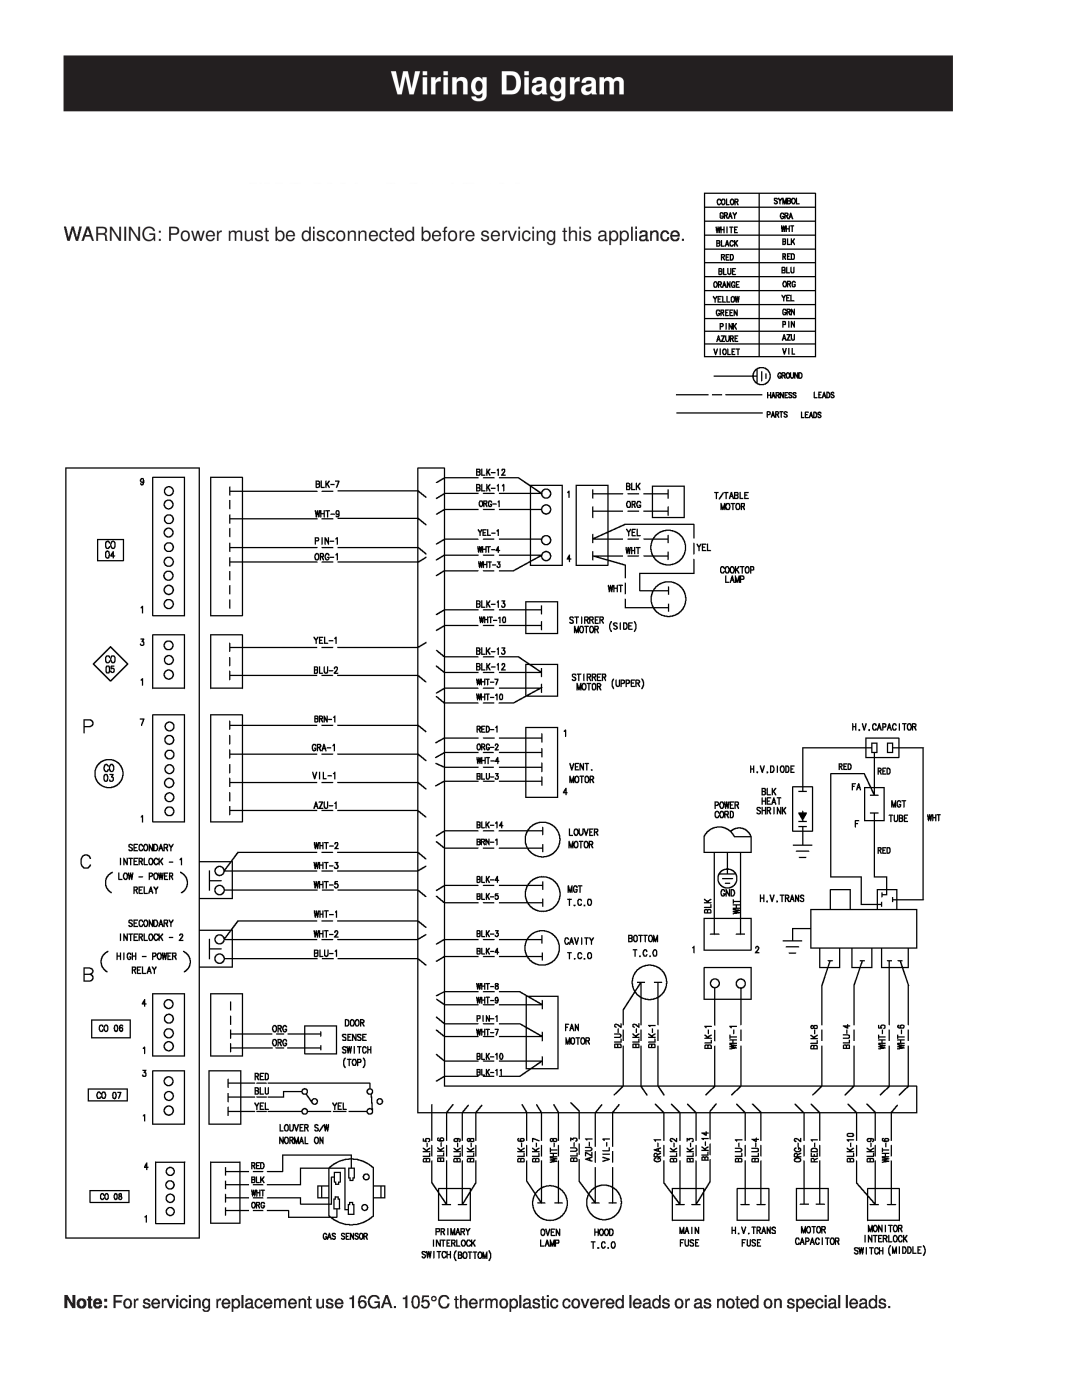 GE JVM2070_H manual Wiring Diagram, WARNING Power must be disconnected before servicing this appliance 